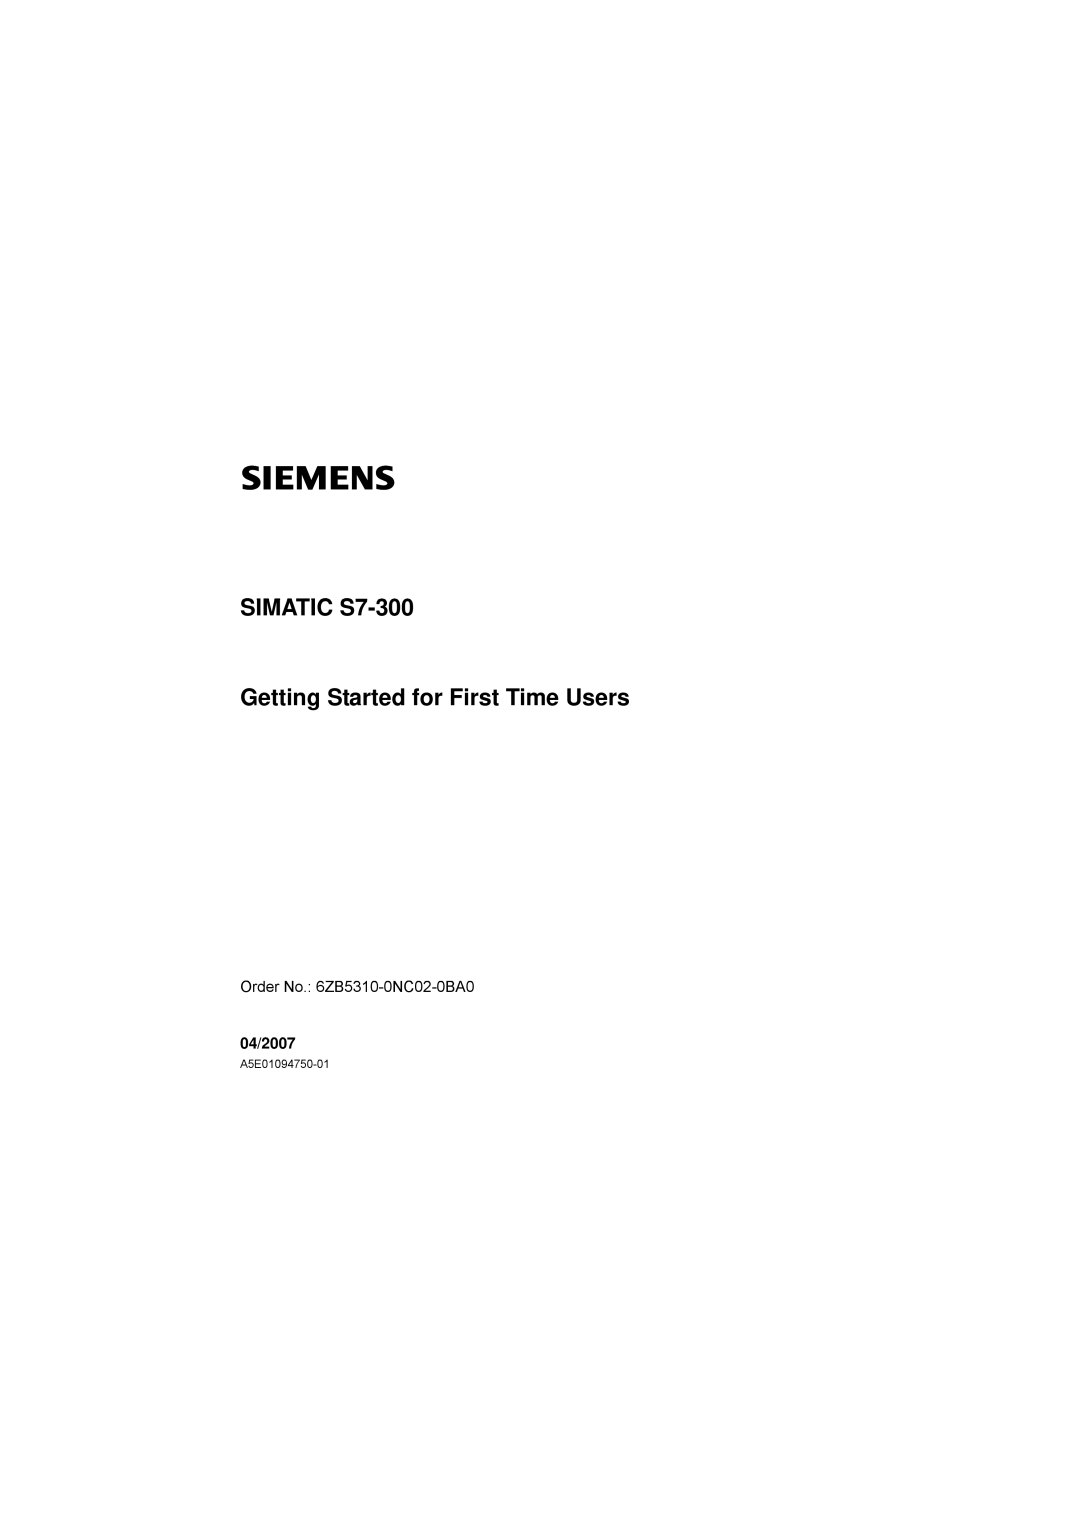 Siemens manual 04/2007, SIMATIC S7-300 Getting Started for First Time Users, Order No. 6ZB5310-0NC02-0BA0 